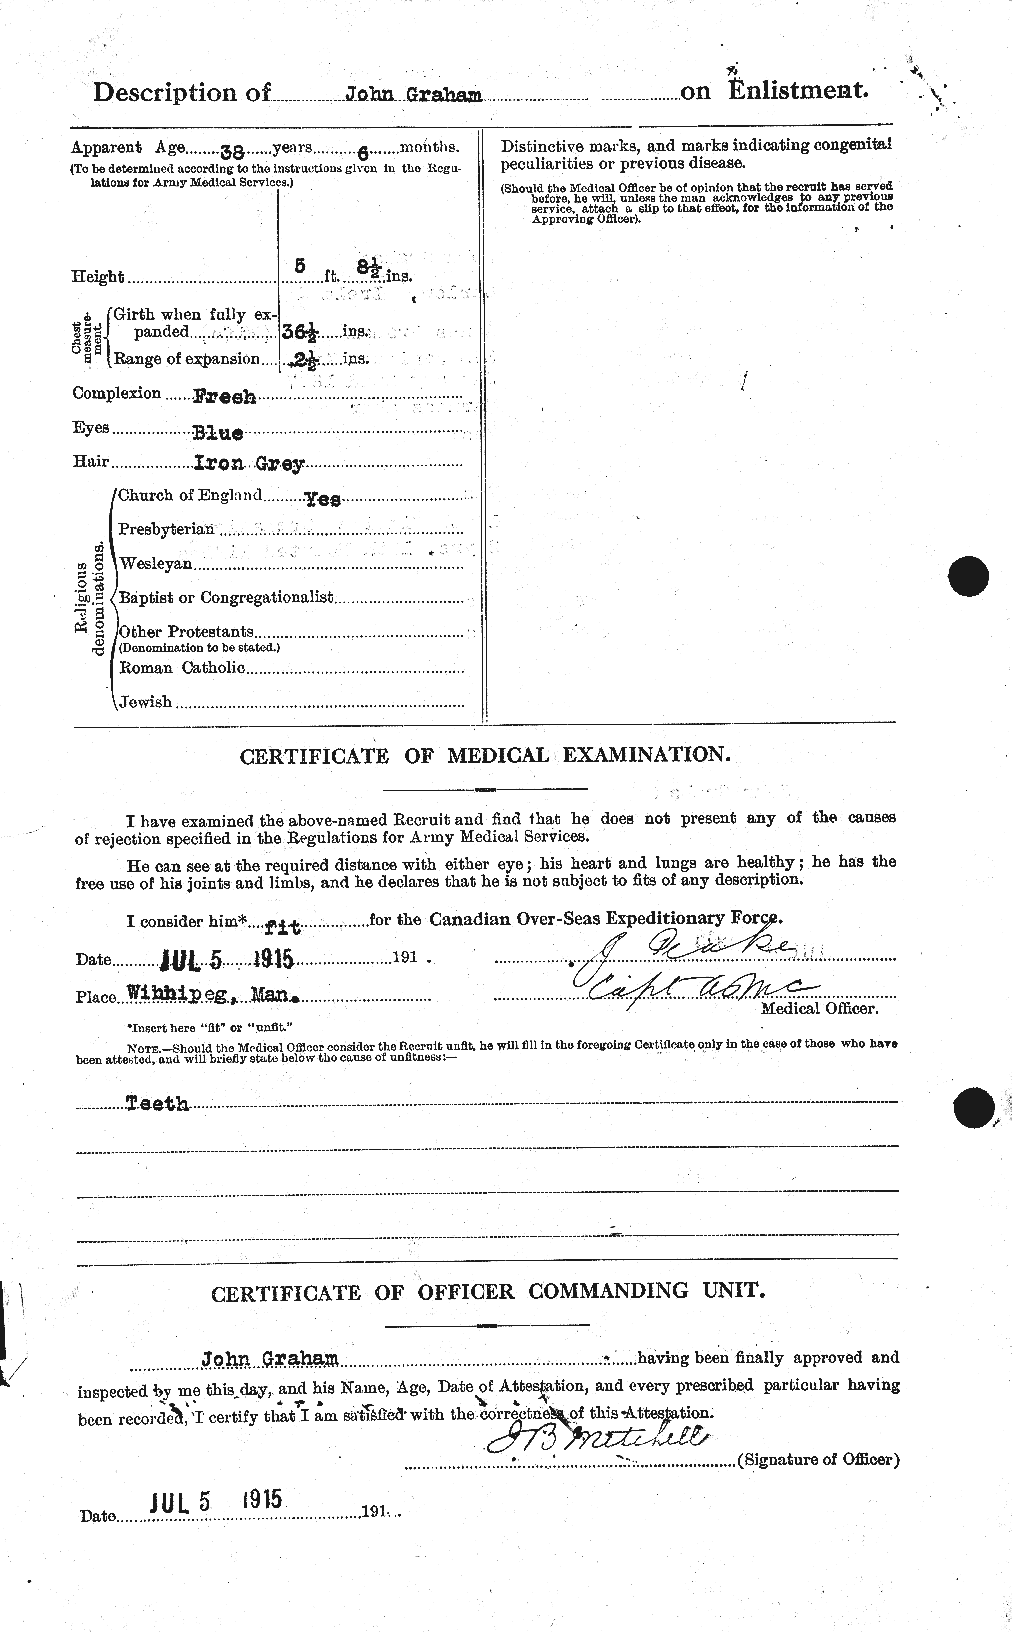 Personnel Records of the First World War - CEF 359149b